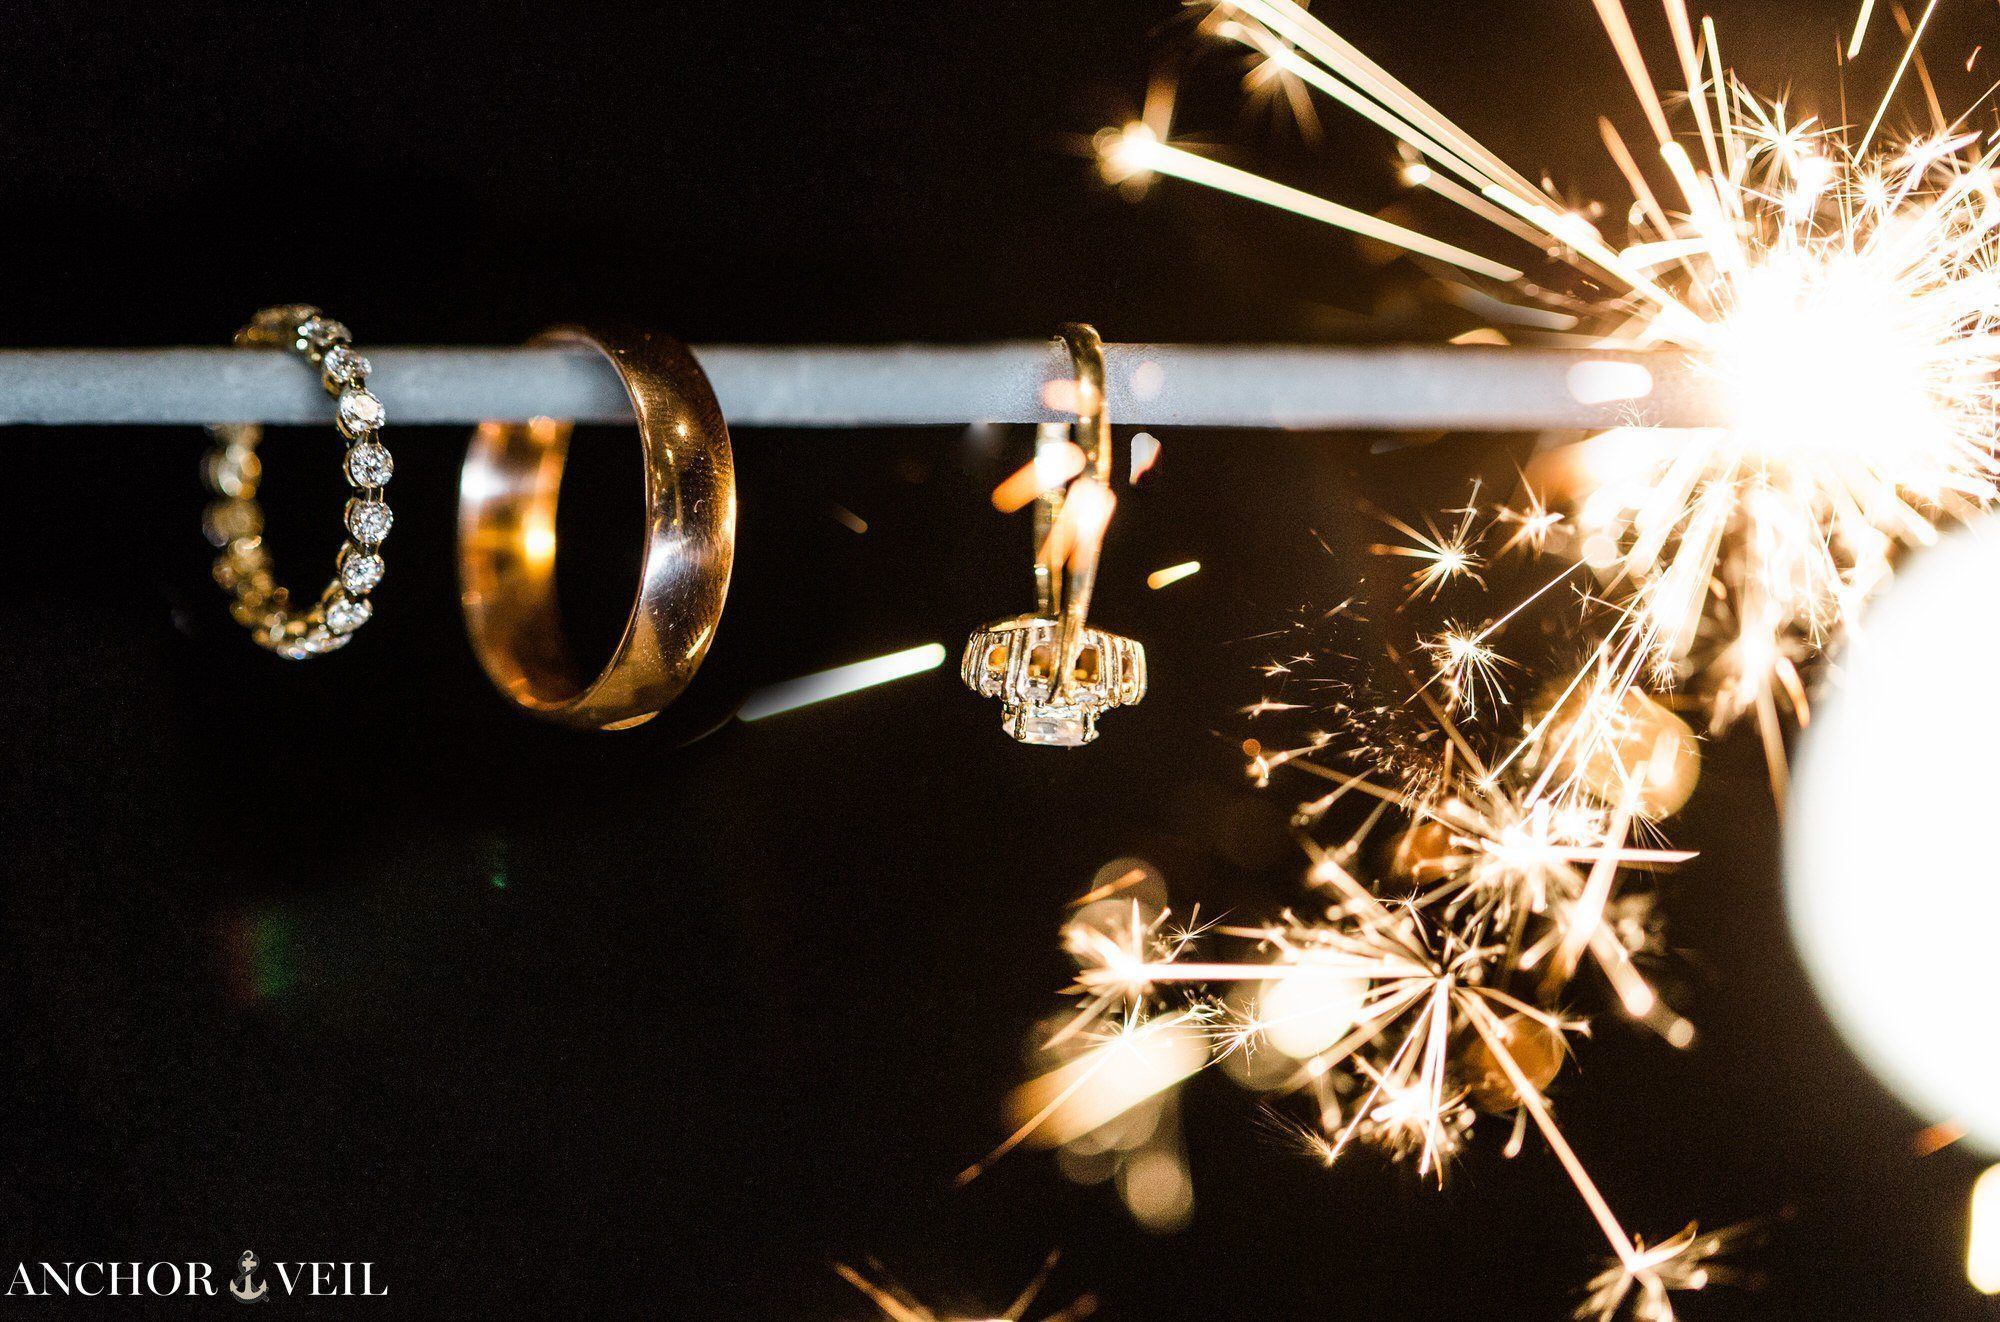 rings with sparklers lighting them up